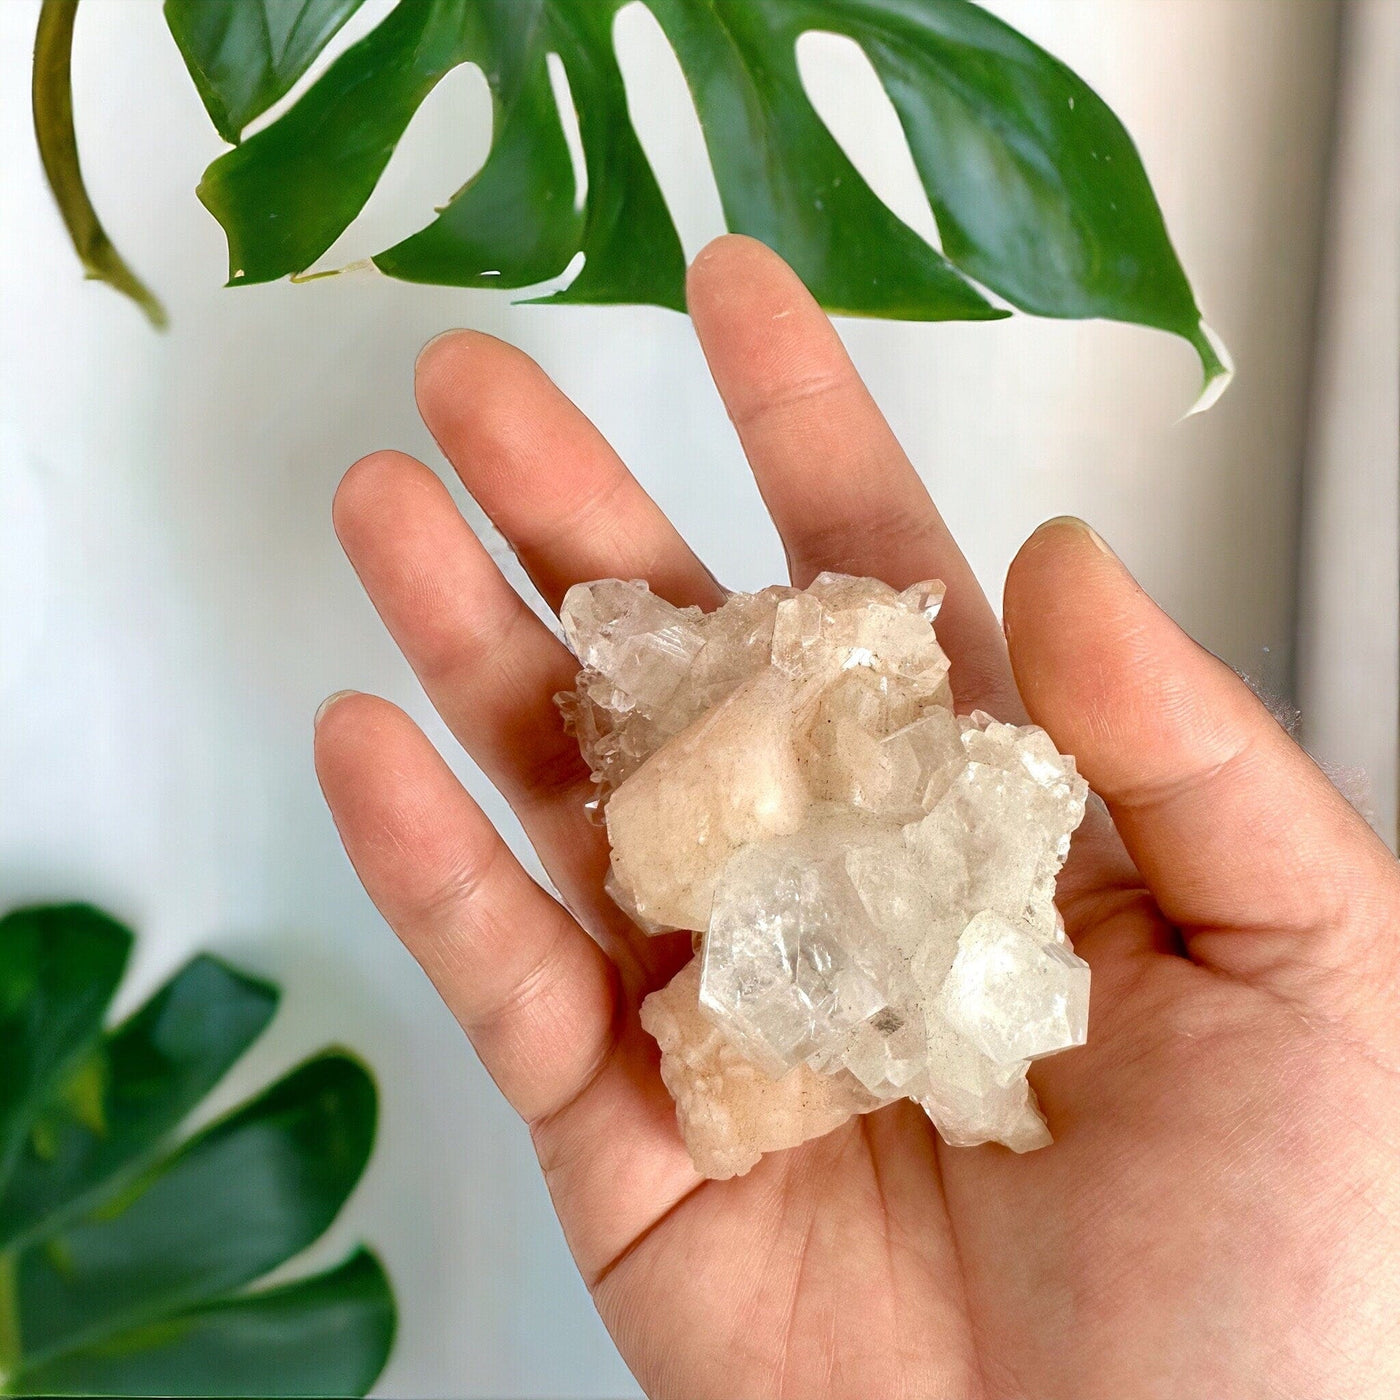 Peach Stilbite Crystal with Apophyllite in hand for size reference with monstera leaves against a white wall in the background 